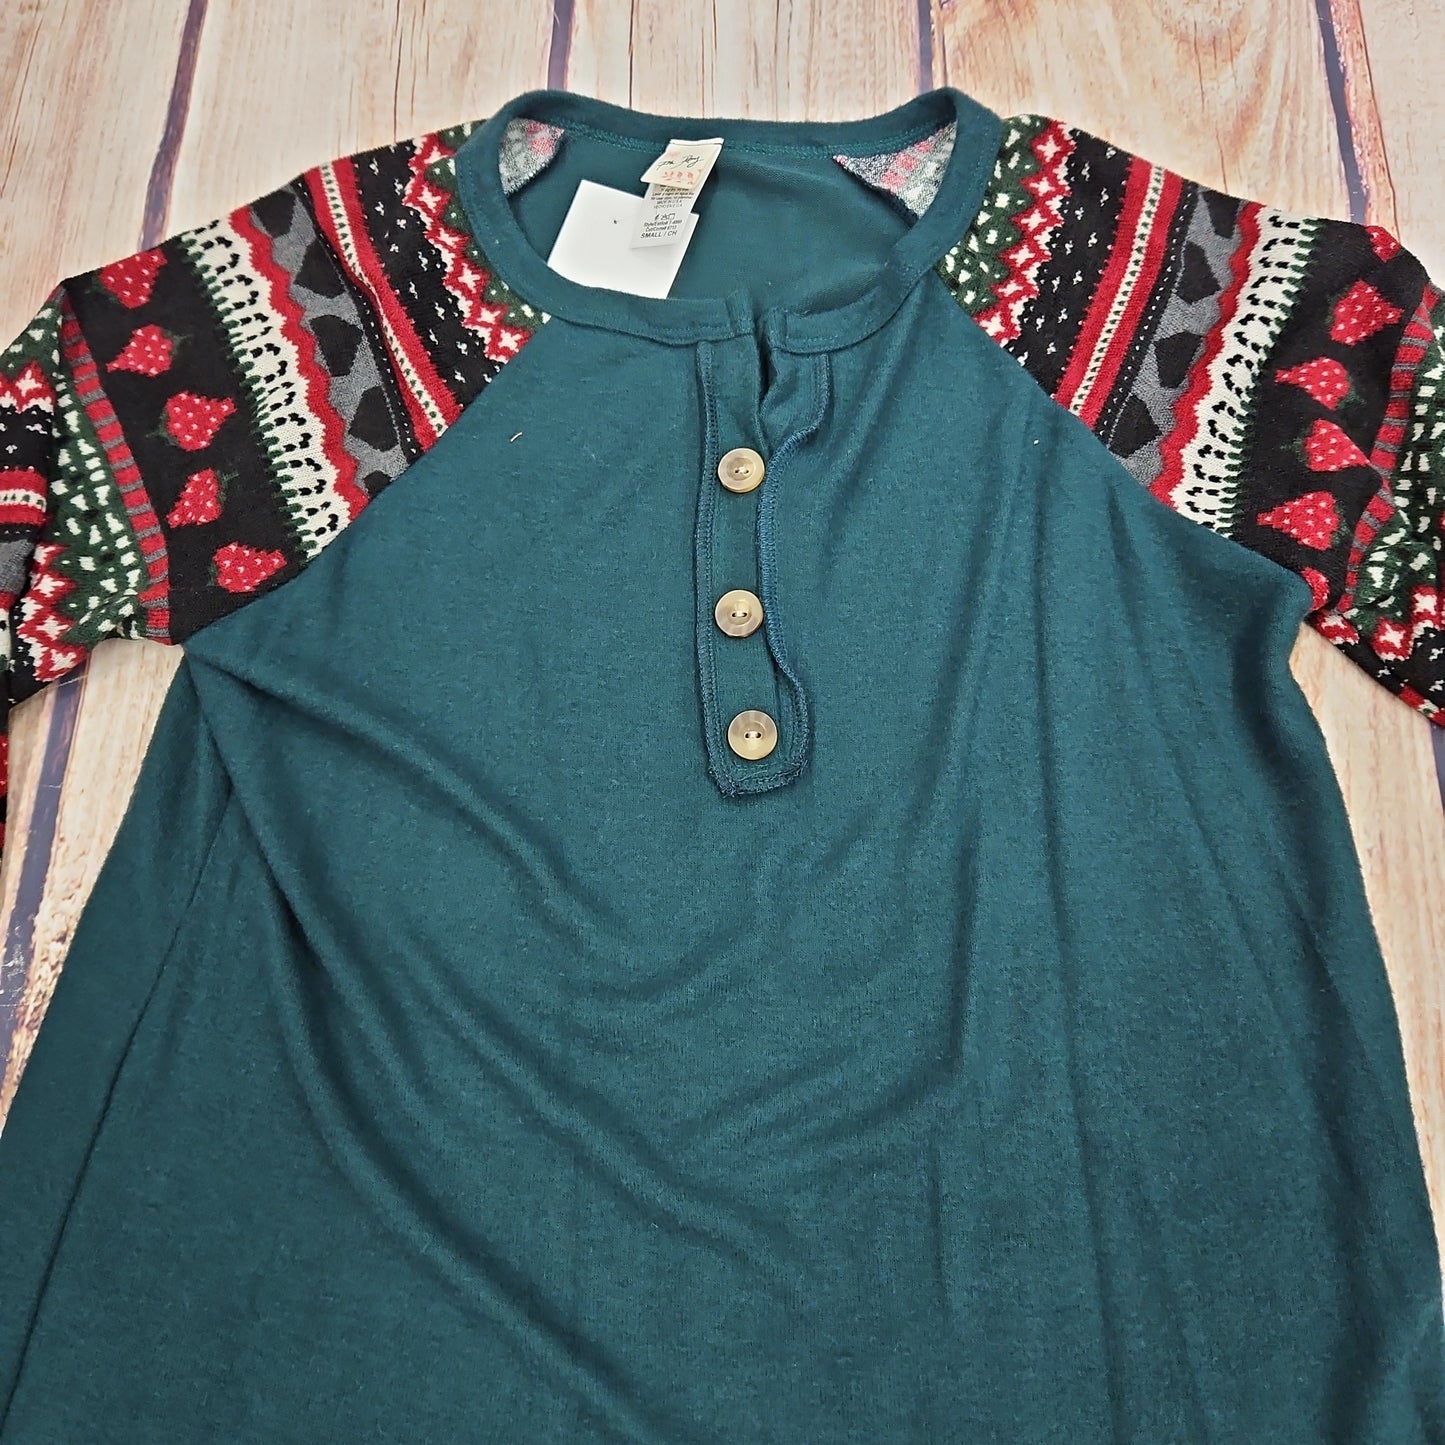 7TH RAY HUNTER GREEN PULLOVER W/ PRINTED SLEEVE